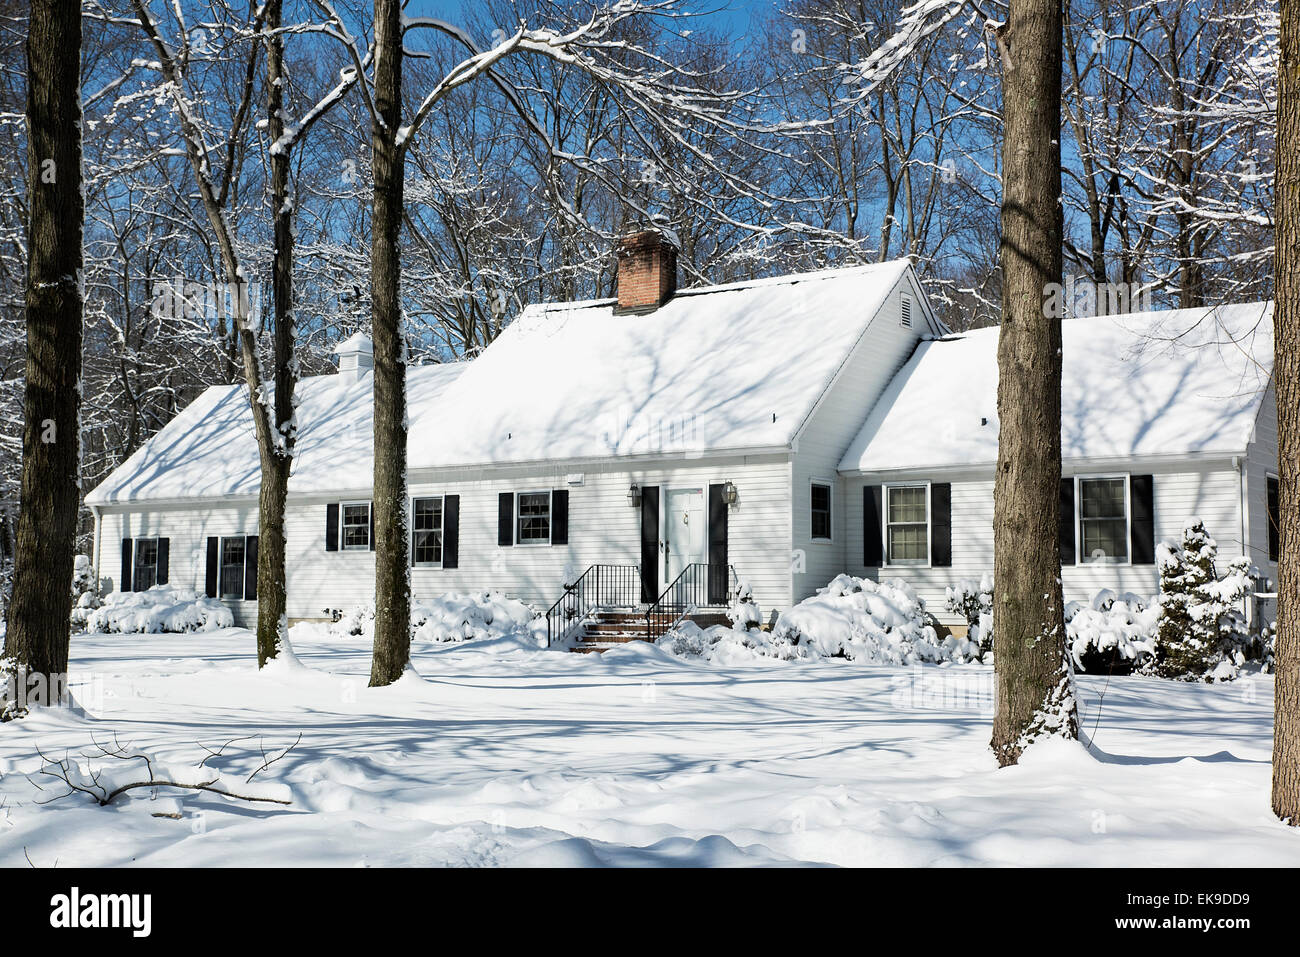 Snow falls outside a rural house, New Jersey, USA Stock Photo